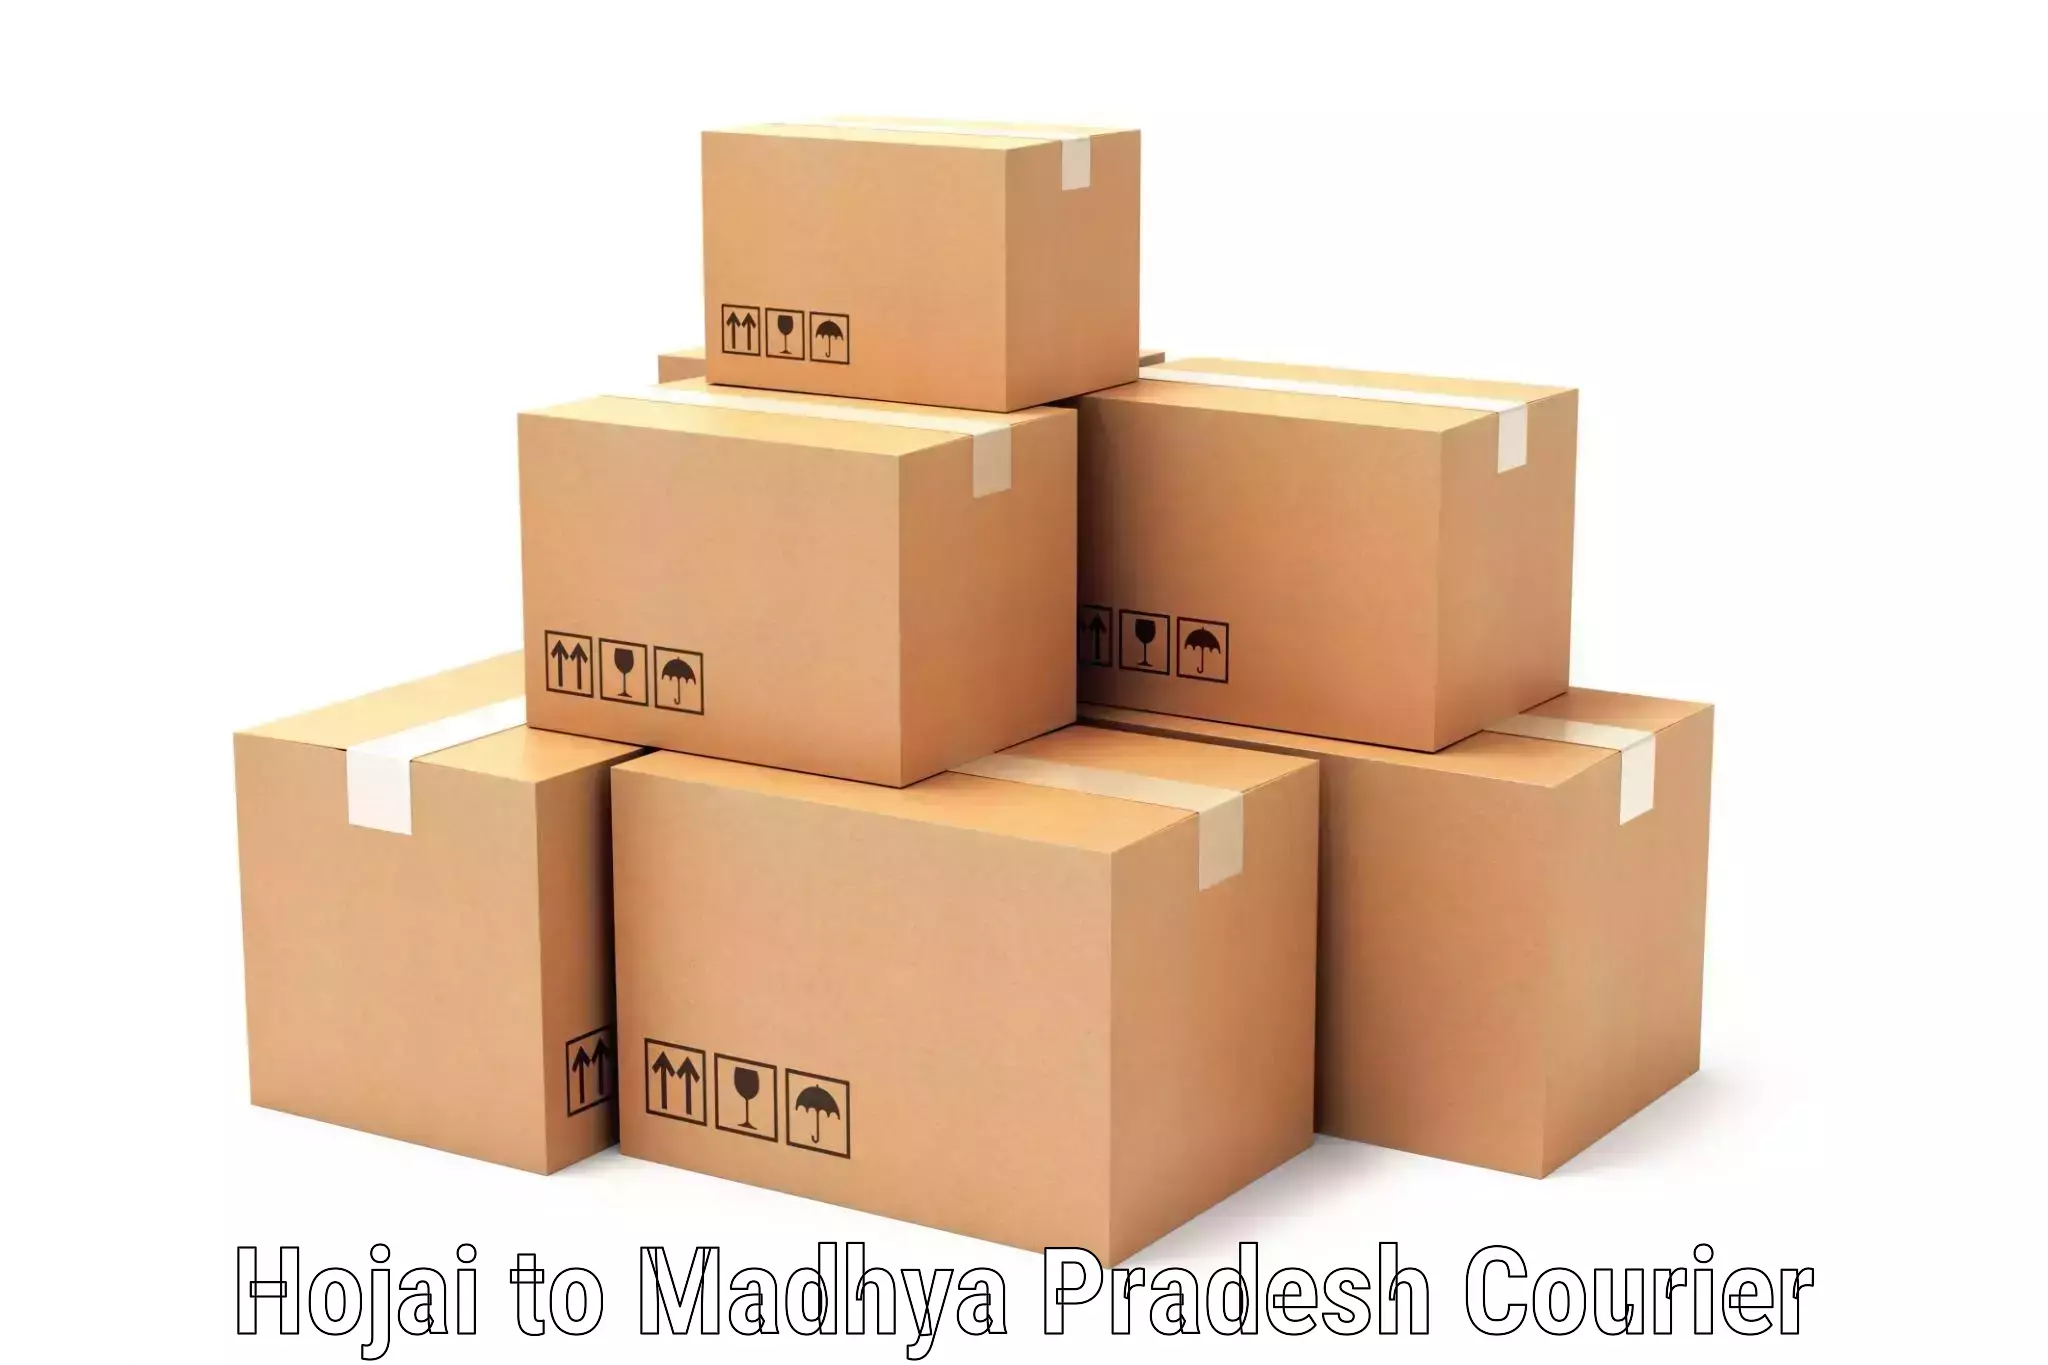 Personal courier services Hojai to IIIT Bhopal